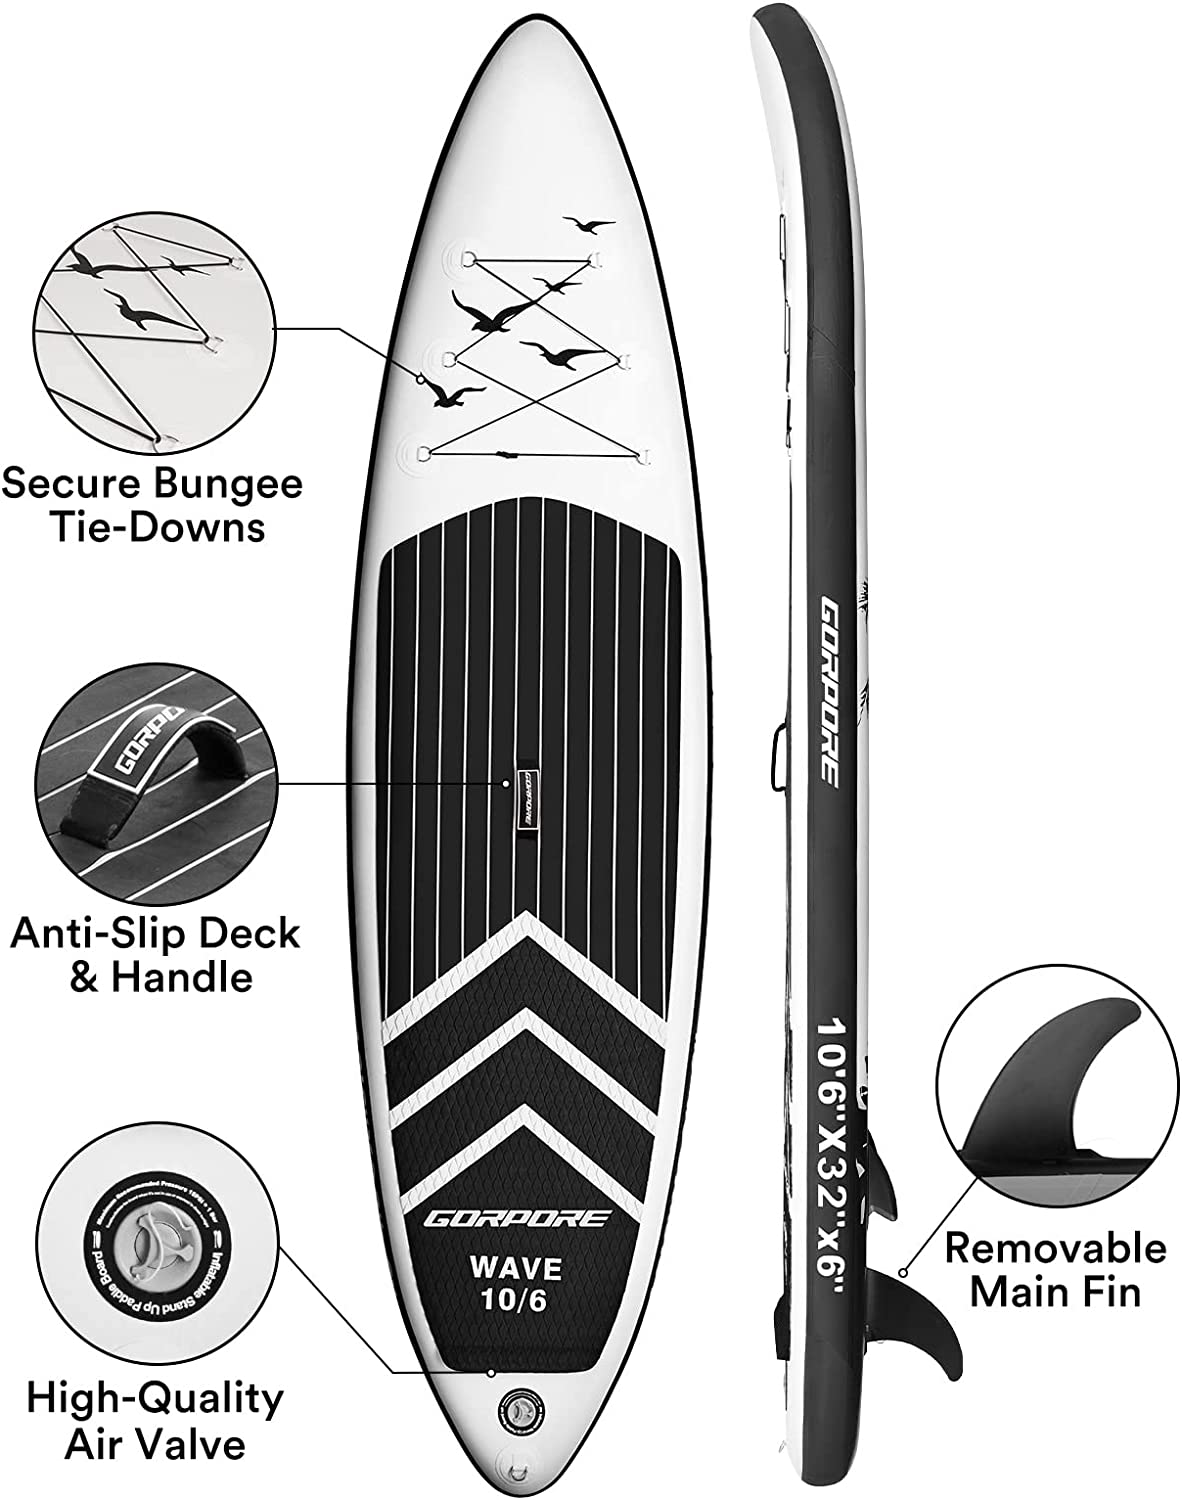 Gorpore Paddle Board, 10ft/10.6ft Inflatable Paddle Board, Stand up Paddle Board with Premium SUP Accessories & Backpack, Emergency Repair Kit,